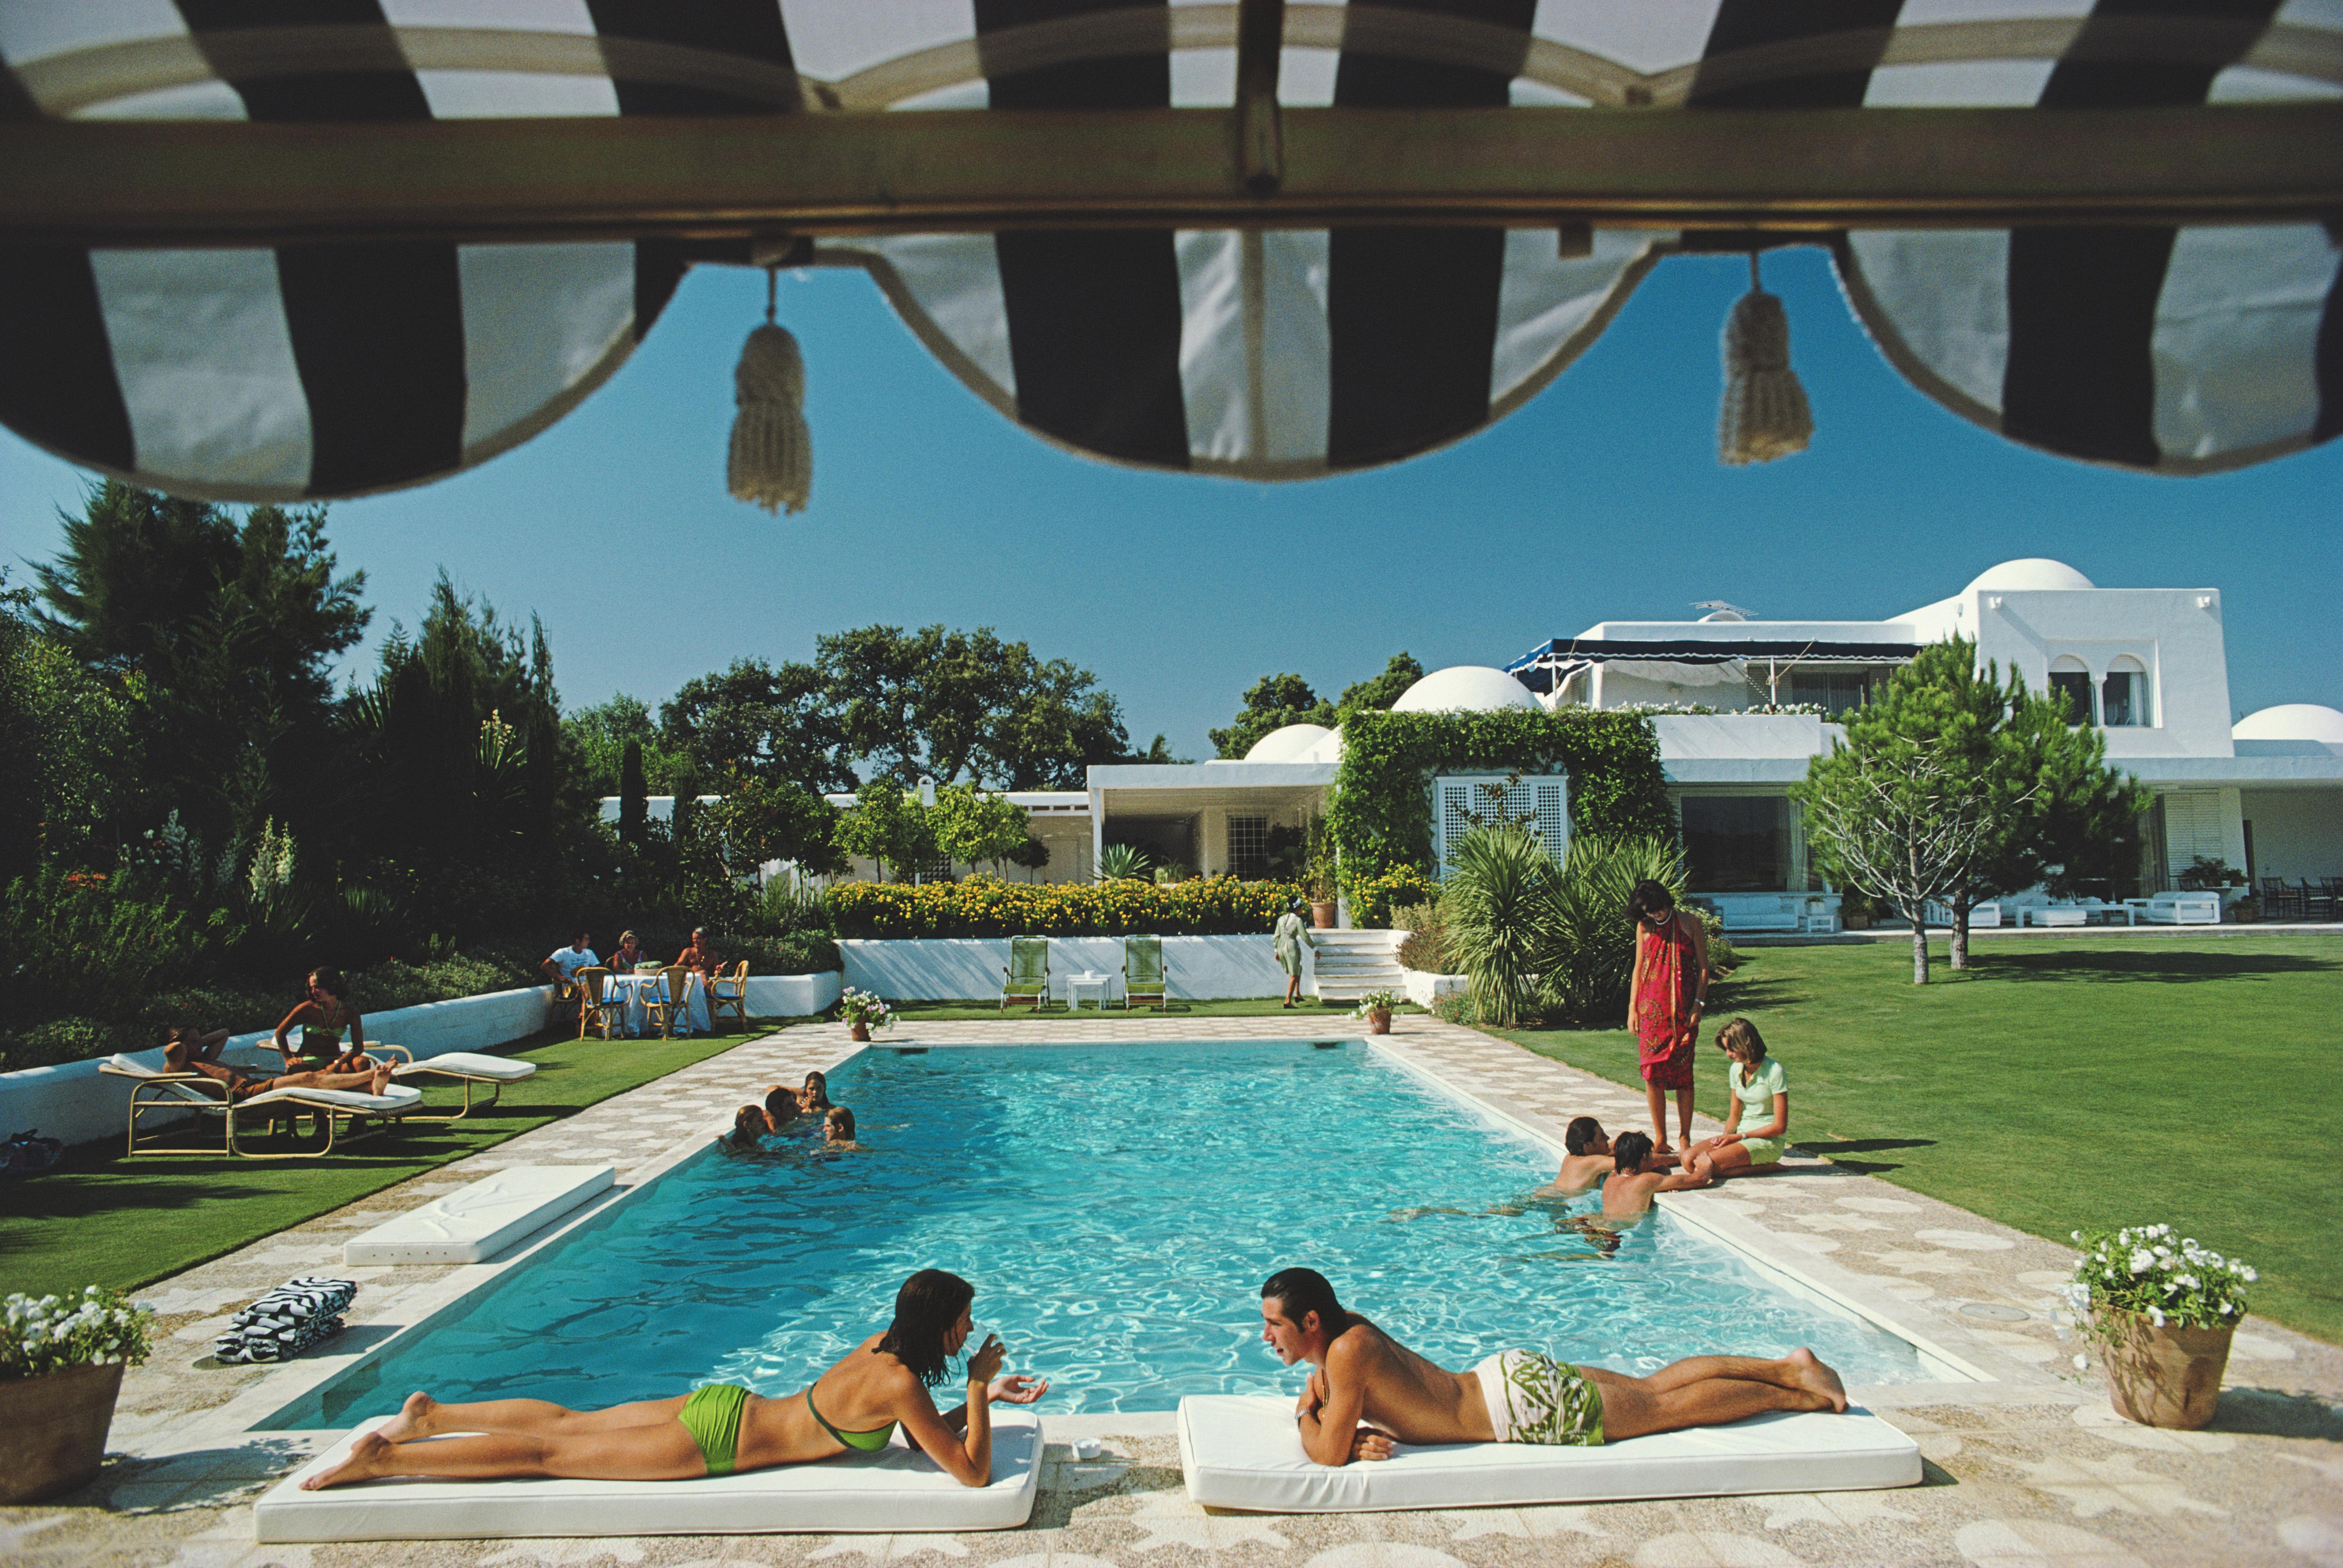 Poolside in Sotogrande, Slim Aarons - 20th century, Photography, Swimming, Print